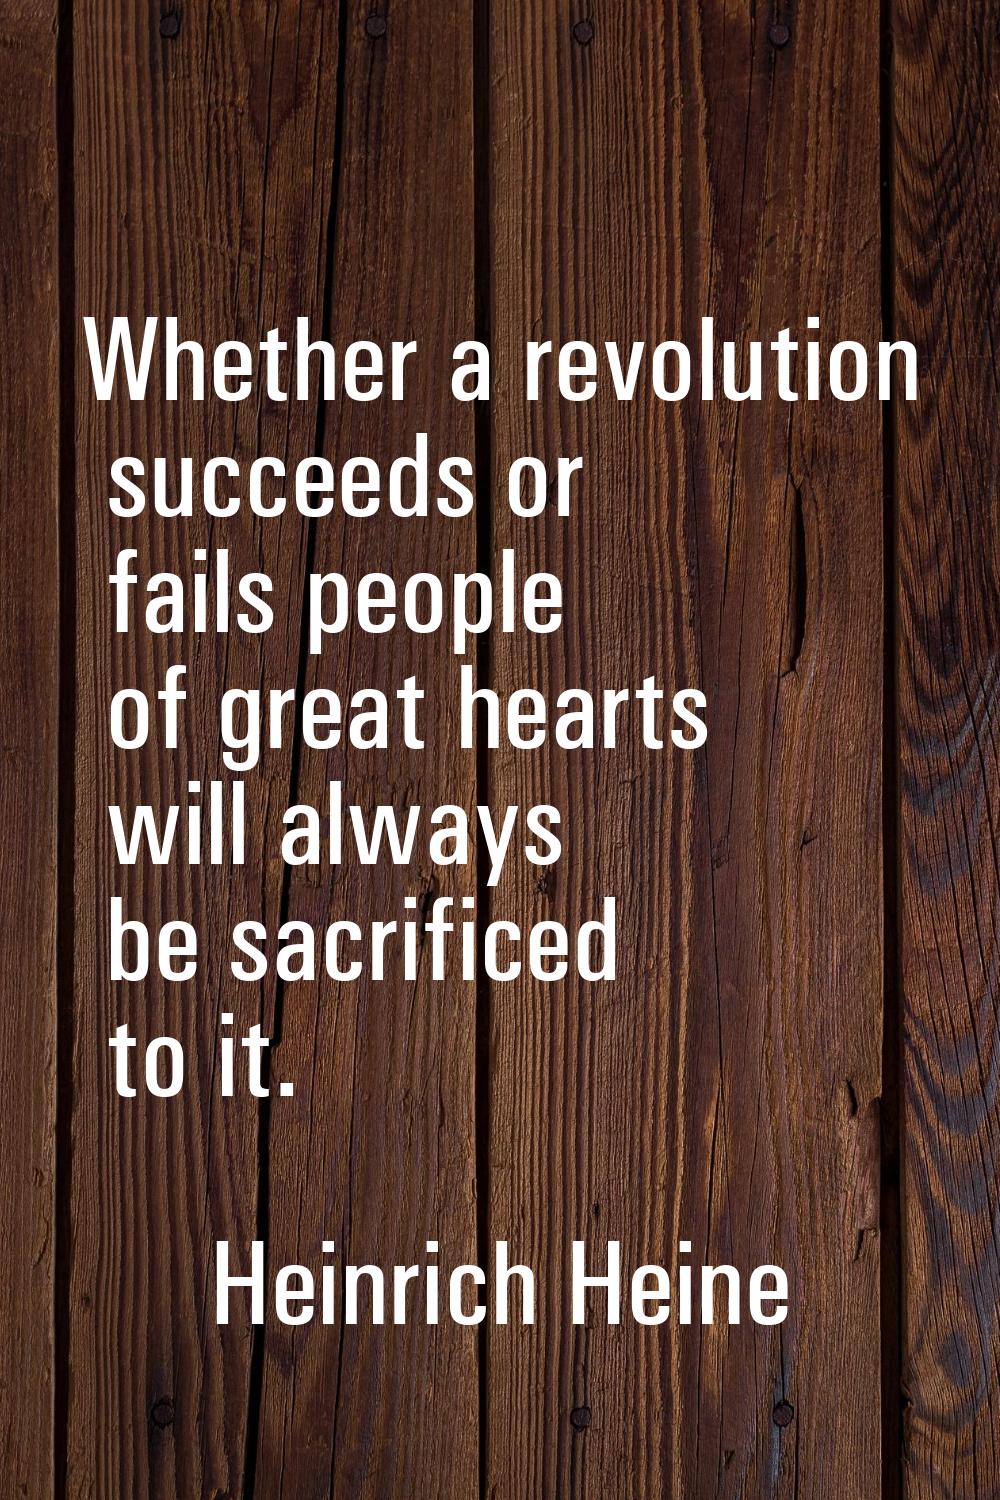 Whether a revolution succeeds or fails people of great hearts will always be sacrificed to it.